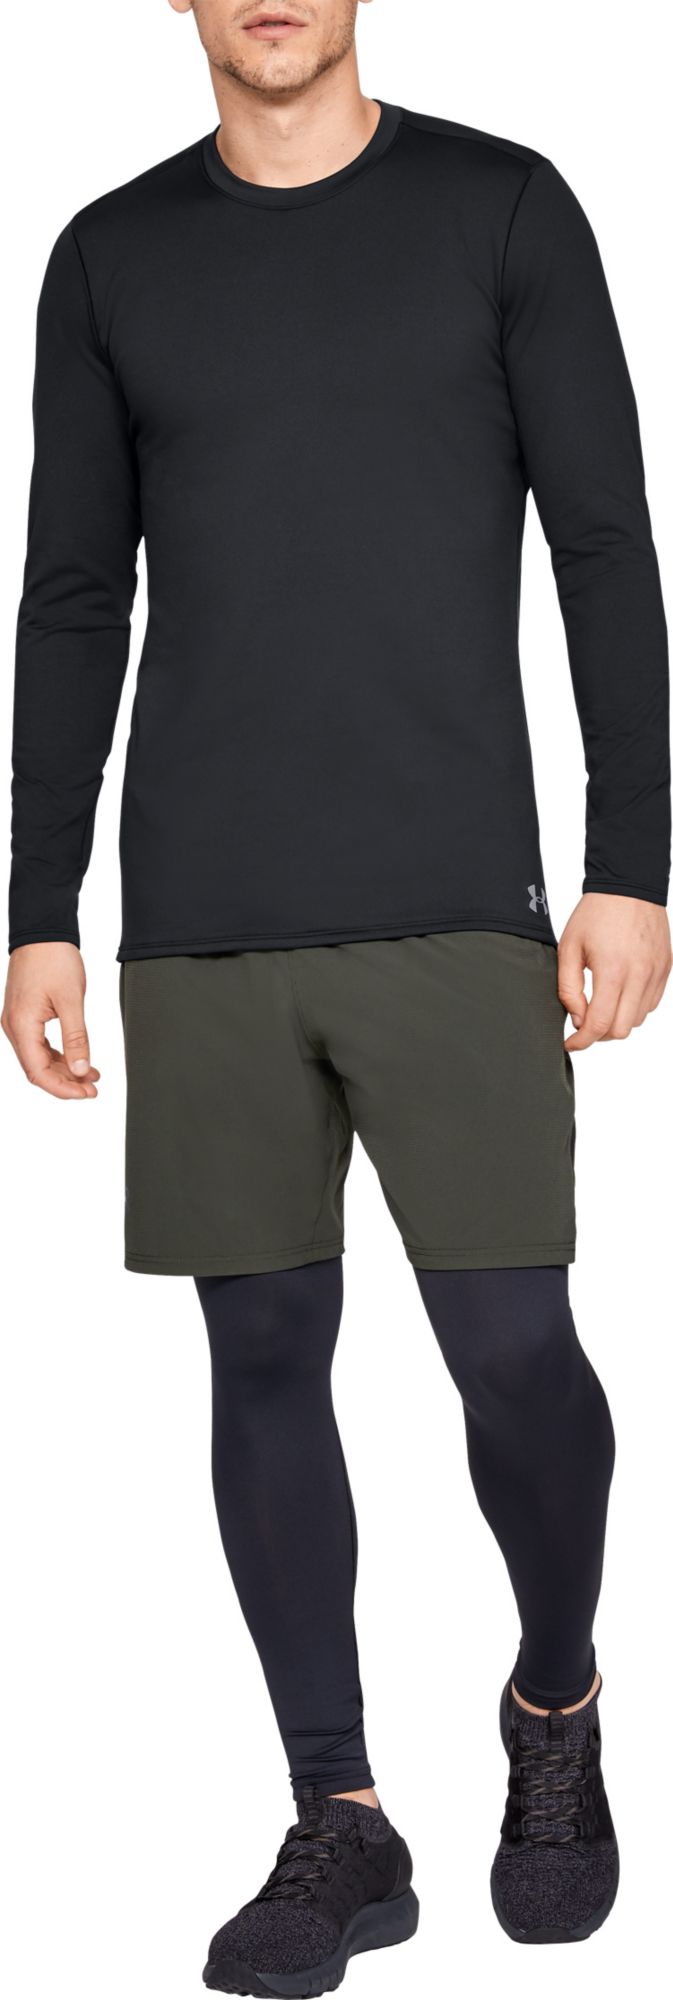 under armour men's coldgear fitted crew